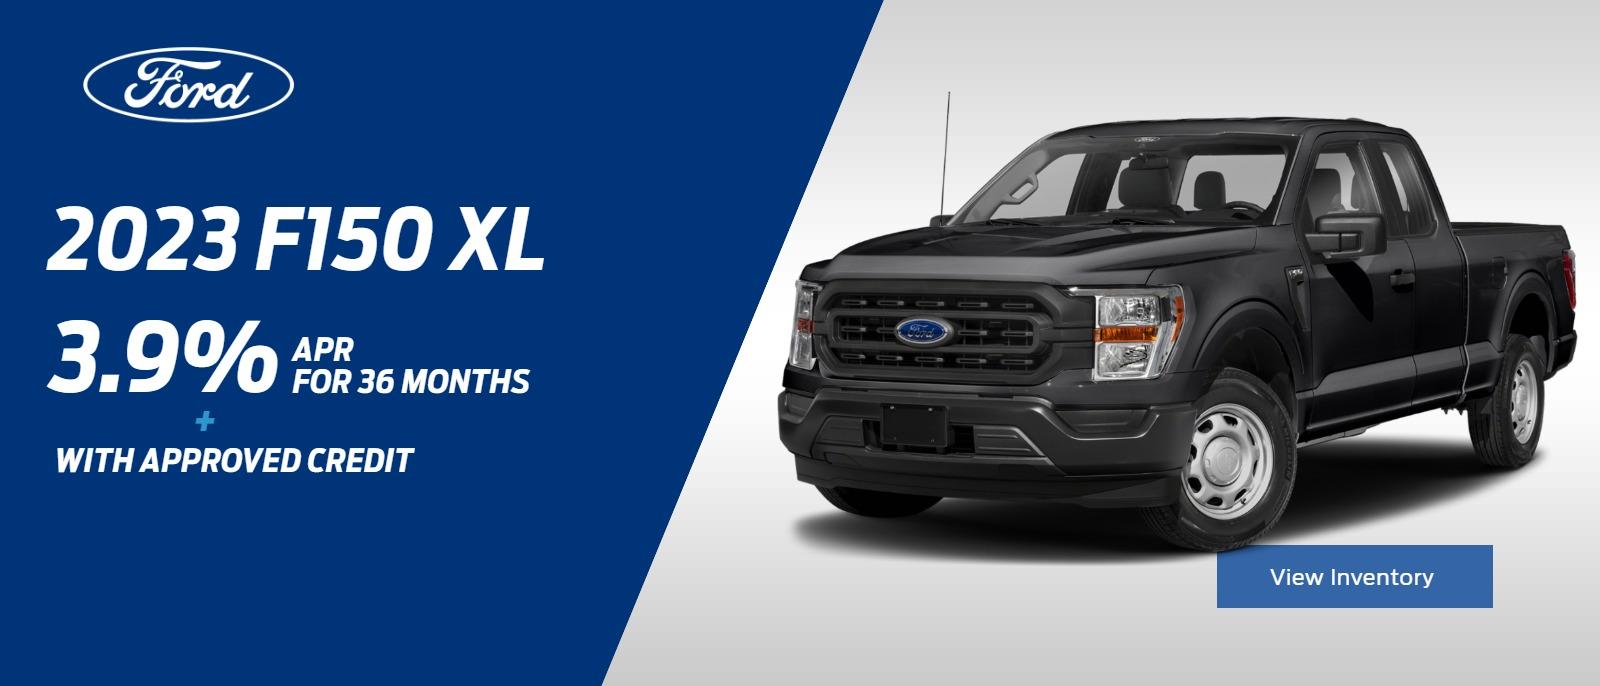 2023 F150 XL. 3.9% apr for 60 months. With approved credit.